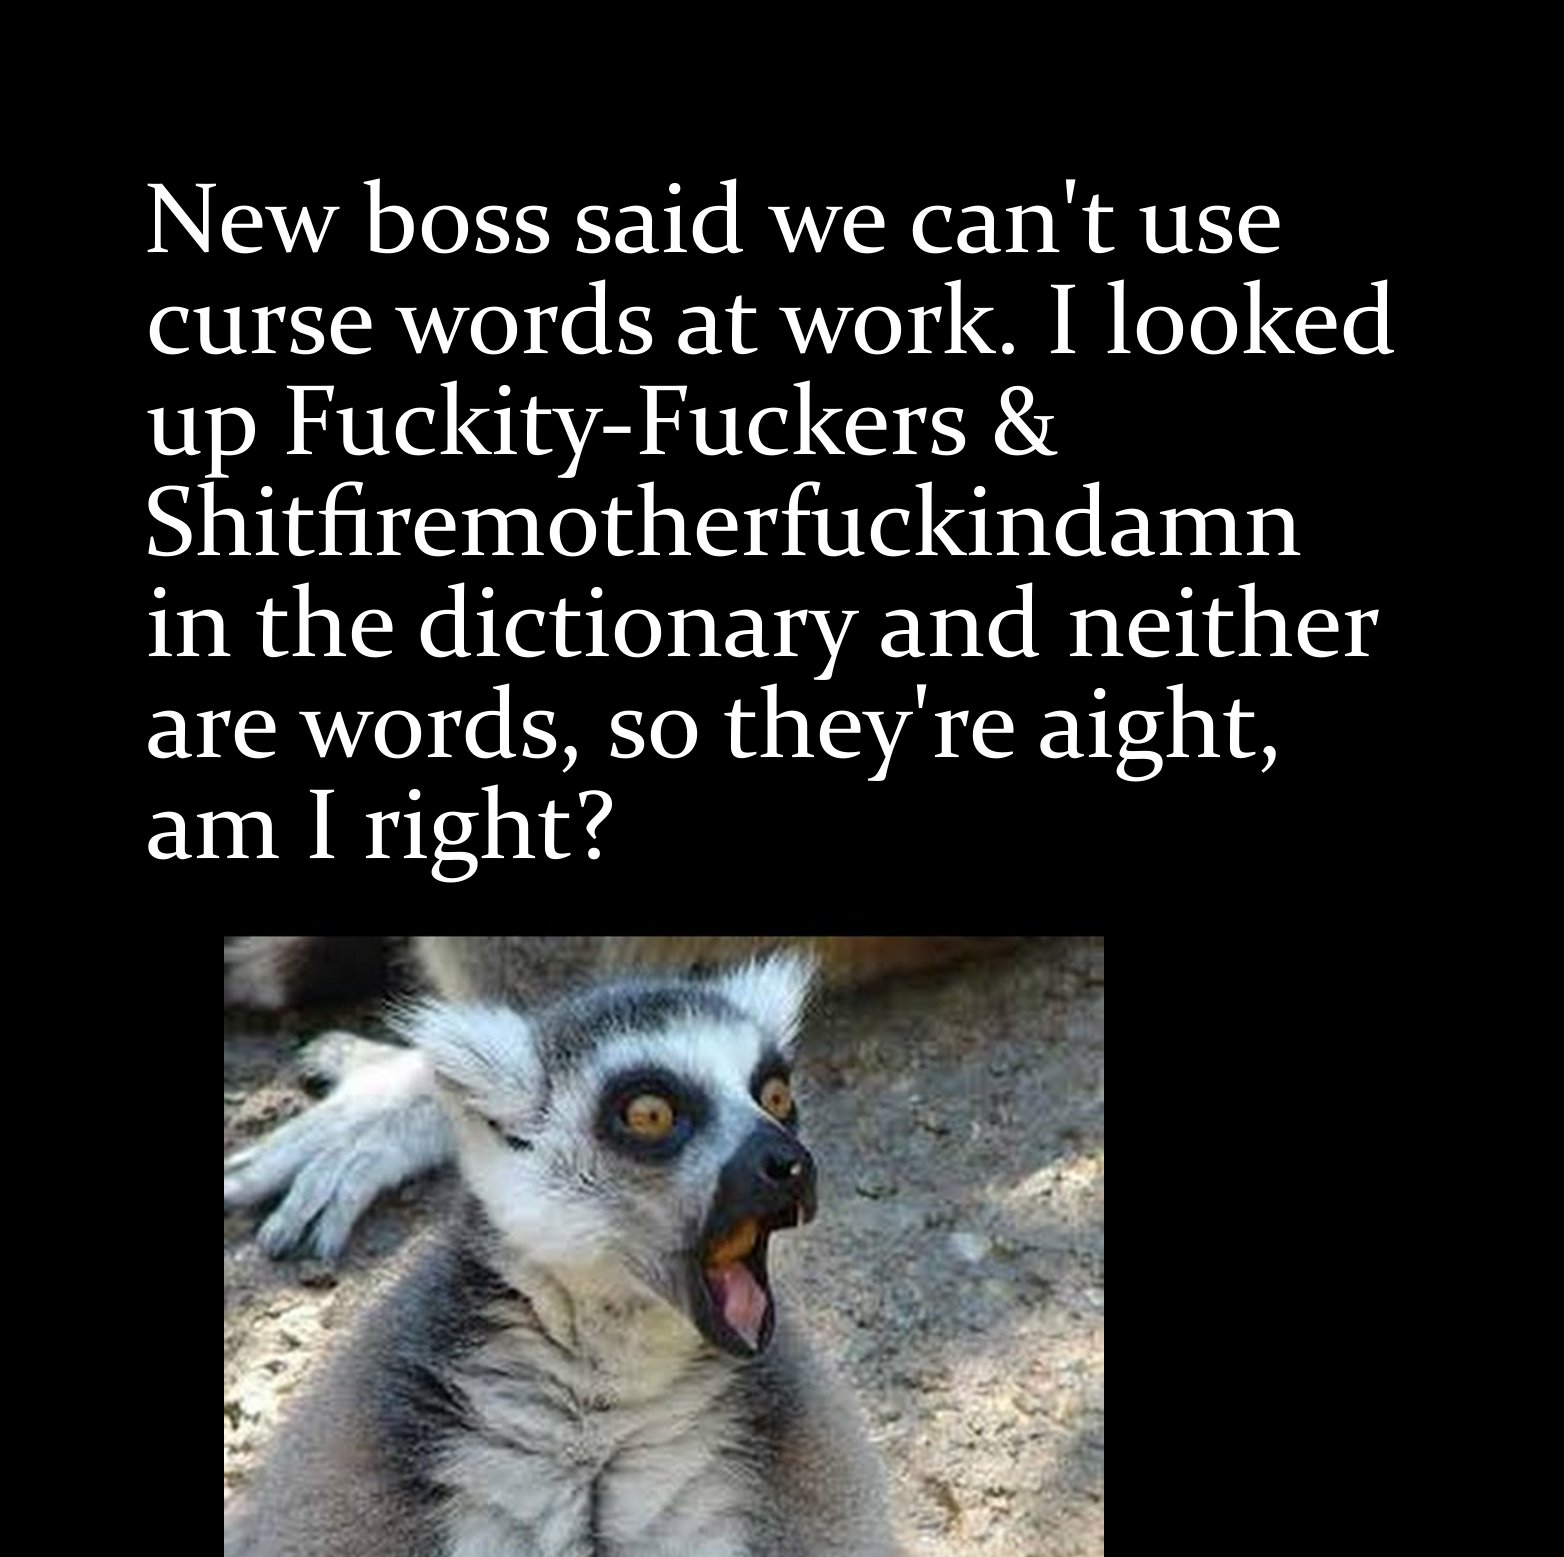 photo caption - New boss said we can't use curse words at work. I looked up FuckityFuckers & Shitfiremotherfuckindamn in the dictionary and neither are words, so they're aight, am I right?